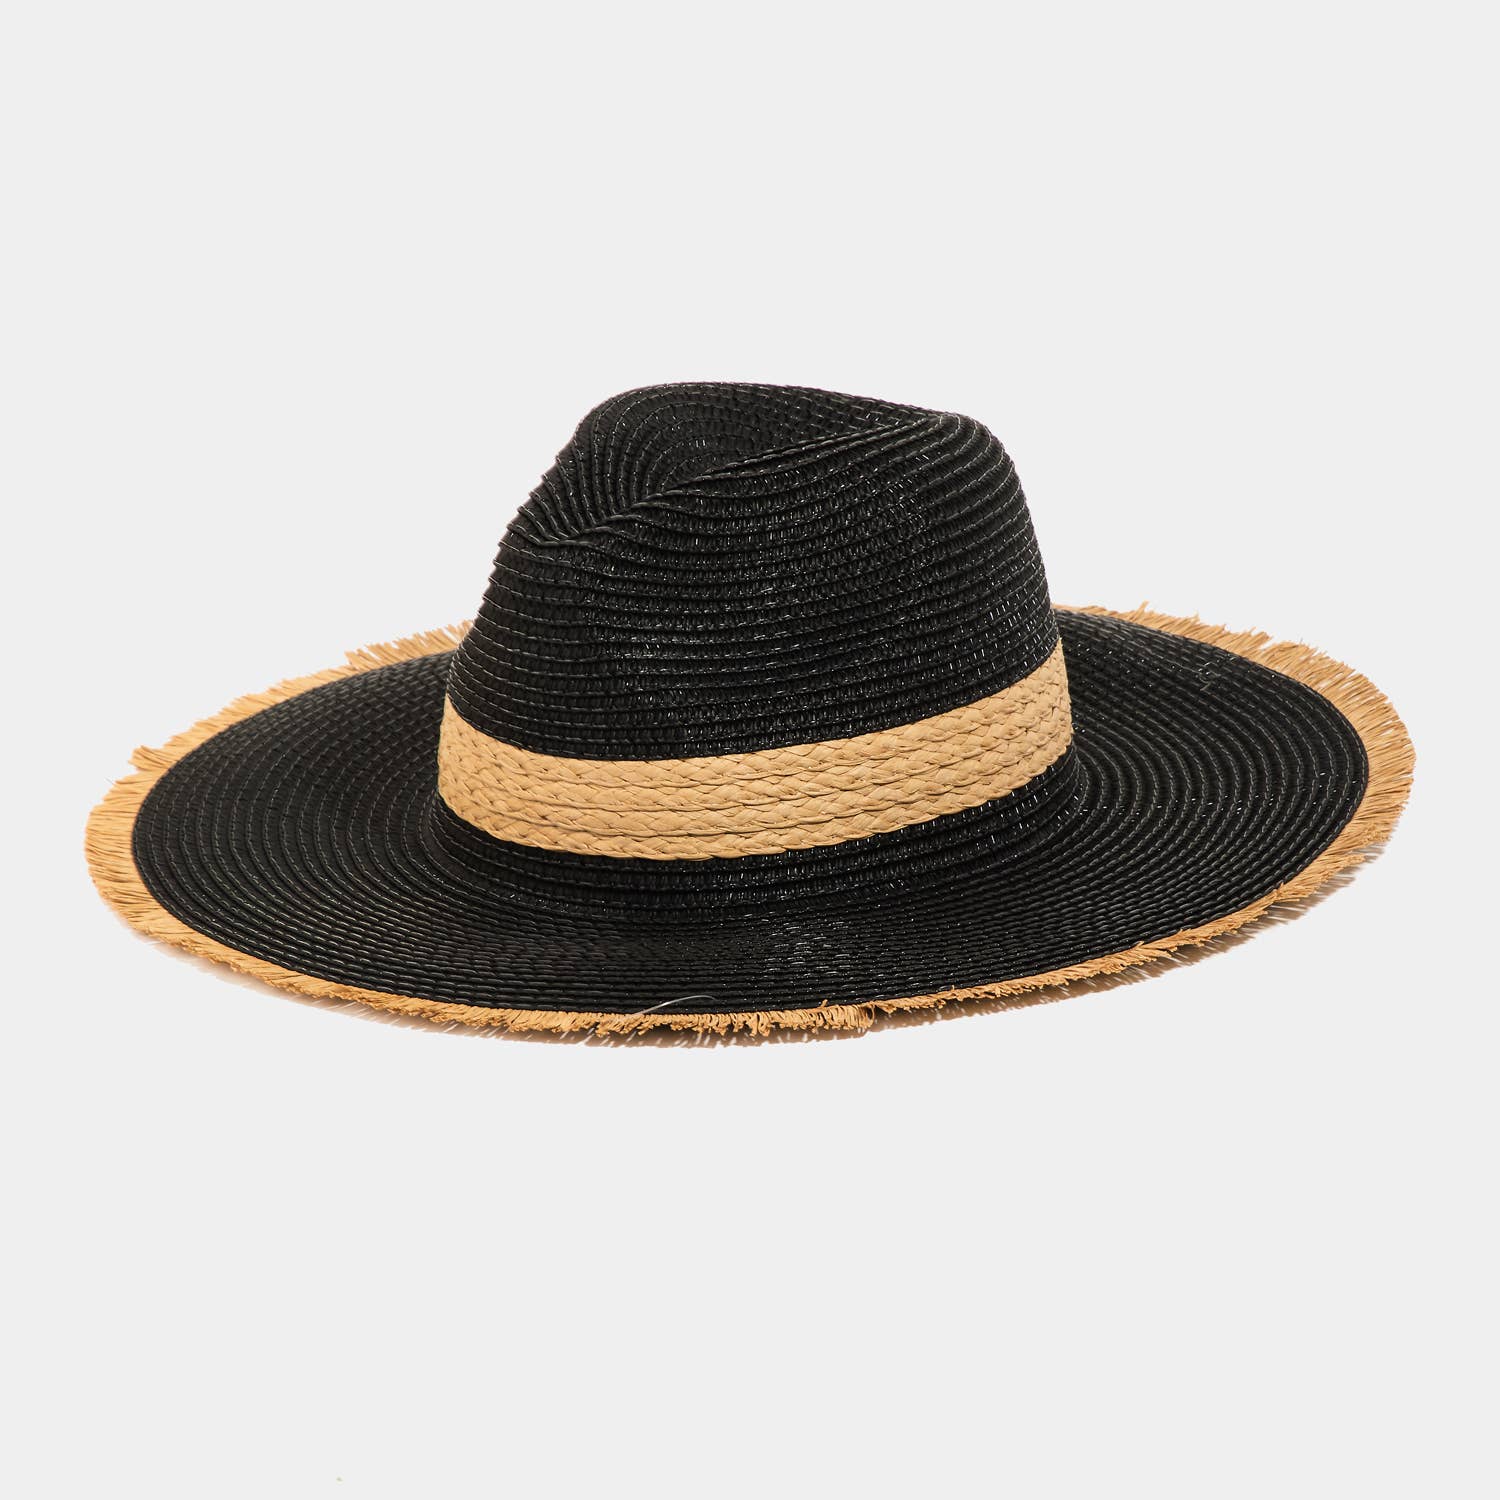 Collections by Fame Accessories - Flat Brim Straw Braided Strap Sun Hat - CLASSY CLOSET BOUTIQUECollections by Fame Accessories - Flat Brim Straw Braided Strap Sun HatBAGS & ACCESSORIESMMT8970BK